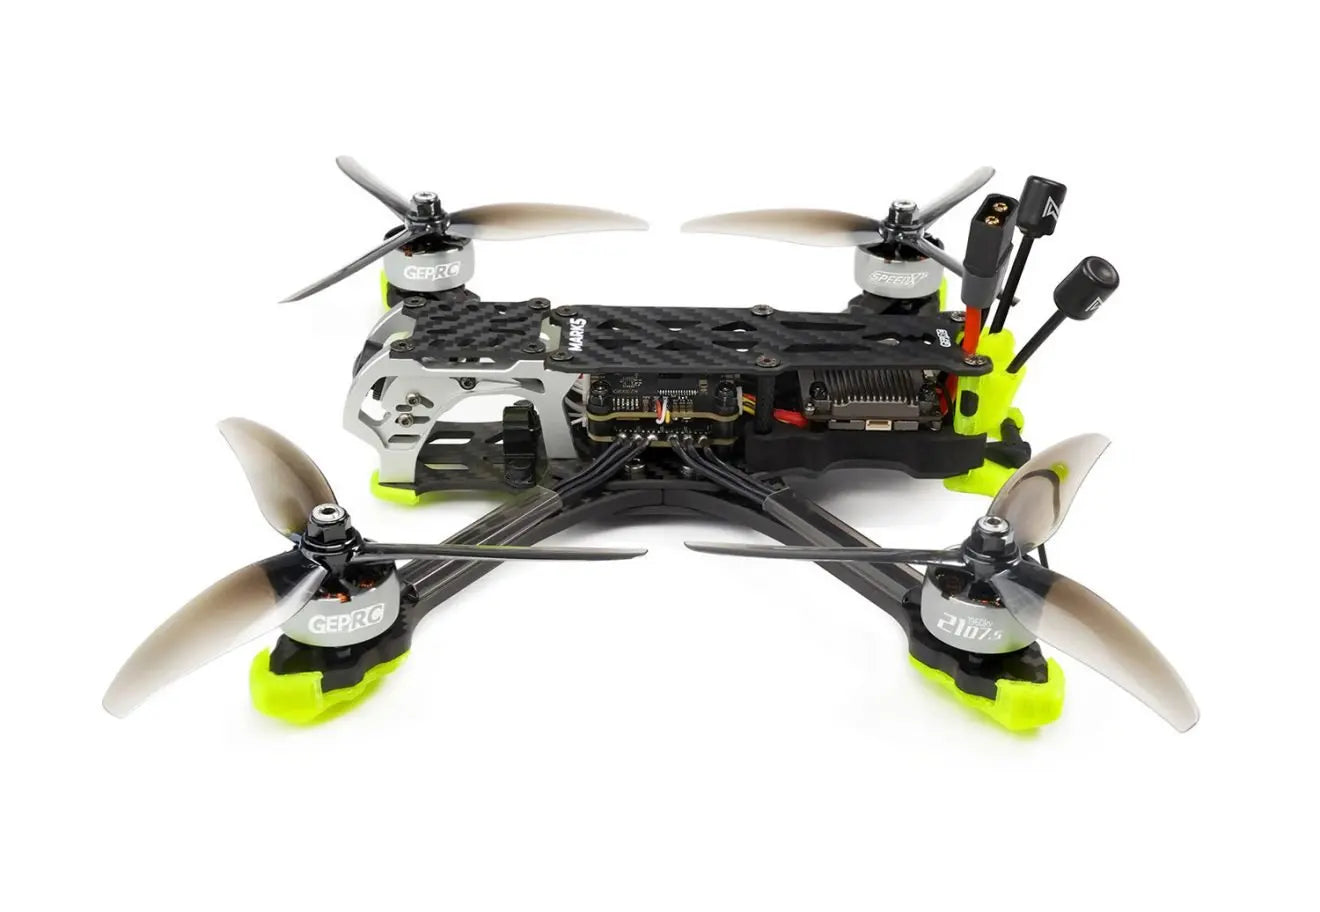 MARK5 HD AVATAR Freestyle FPV Drone, the new GEMFAN Freestyle 4S propellers provide delicate and silky smooth